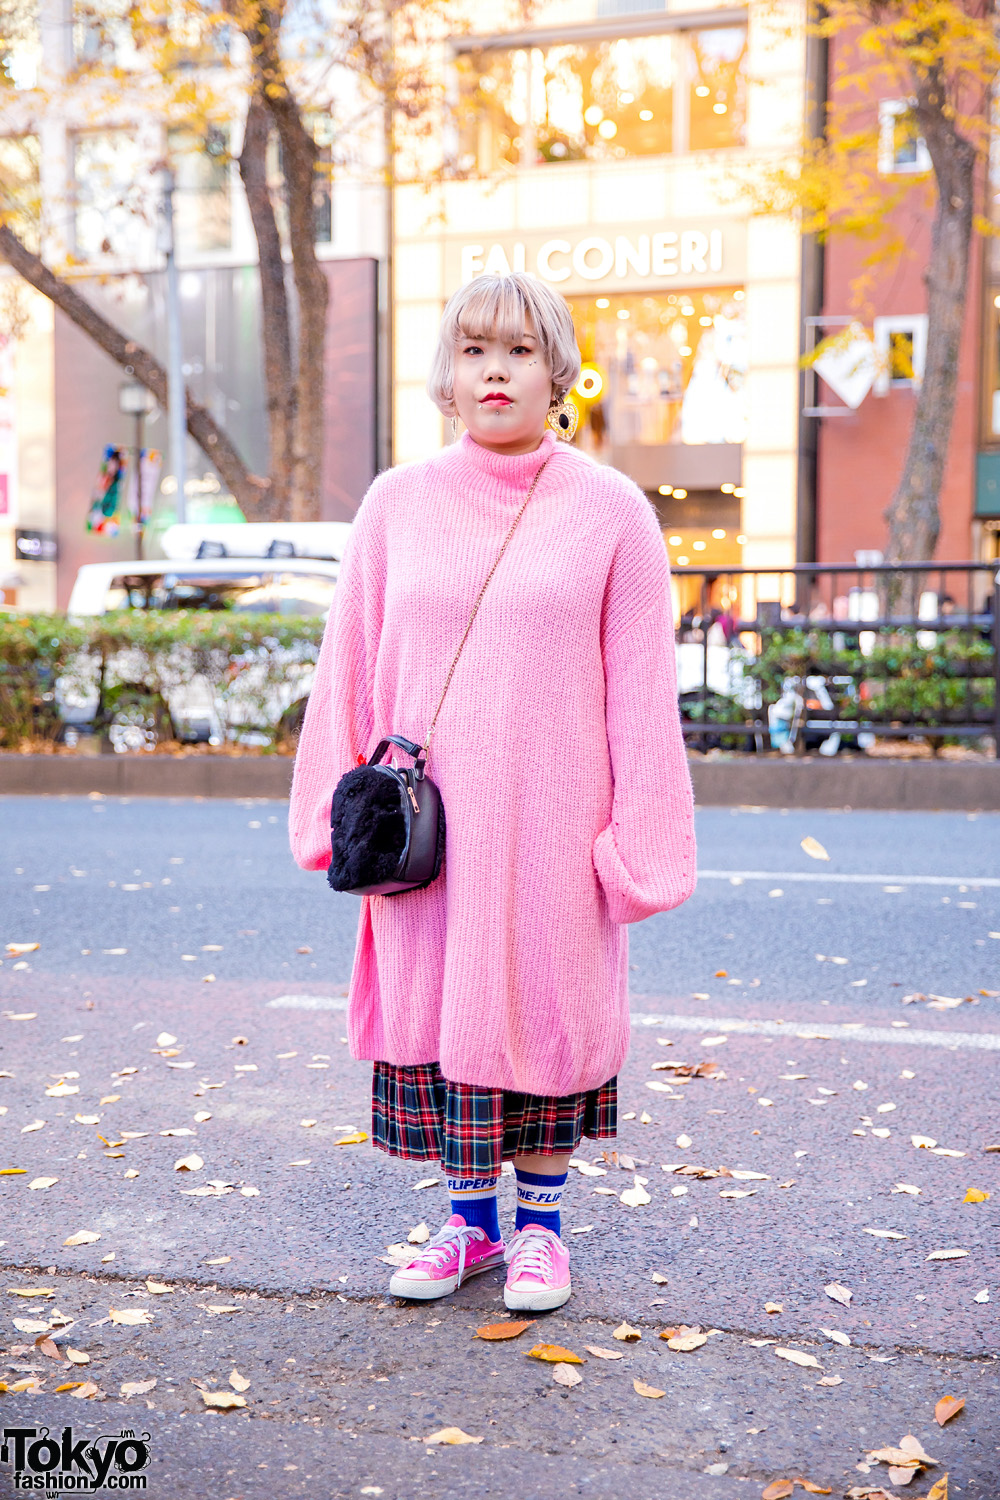 Oversized Sweater Fashion in Harajuku w/ Ear & Facial Piercings, H&M Loose Knit Sweater Dress, Plaid Midi Skirt, Furry Chain Bag & Pink Sneakers